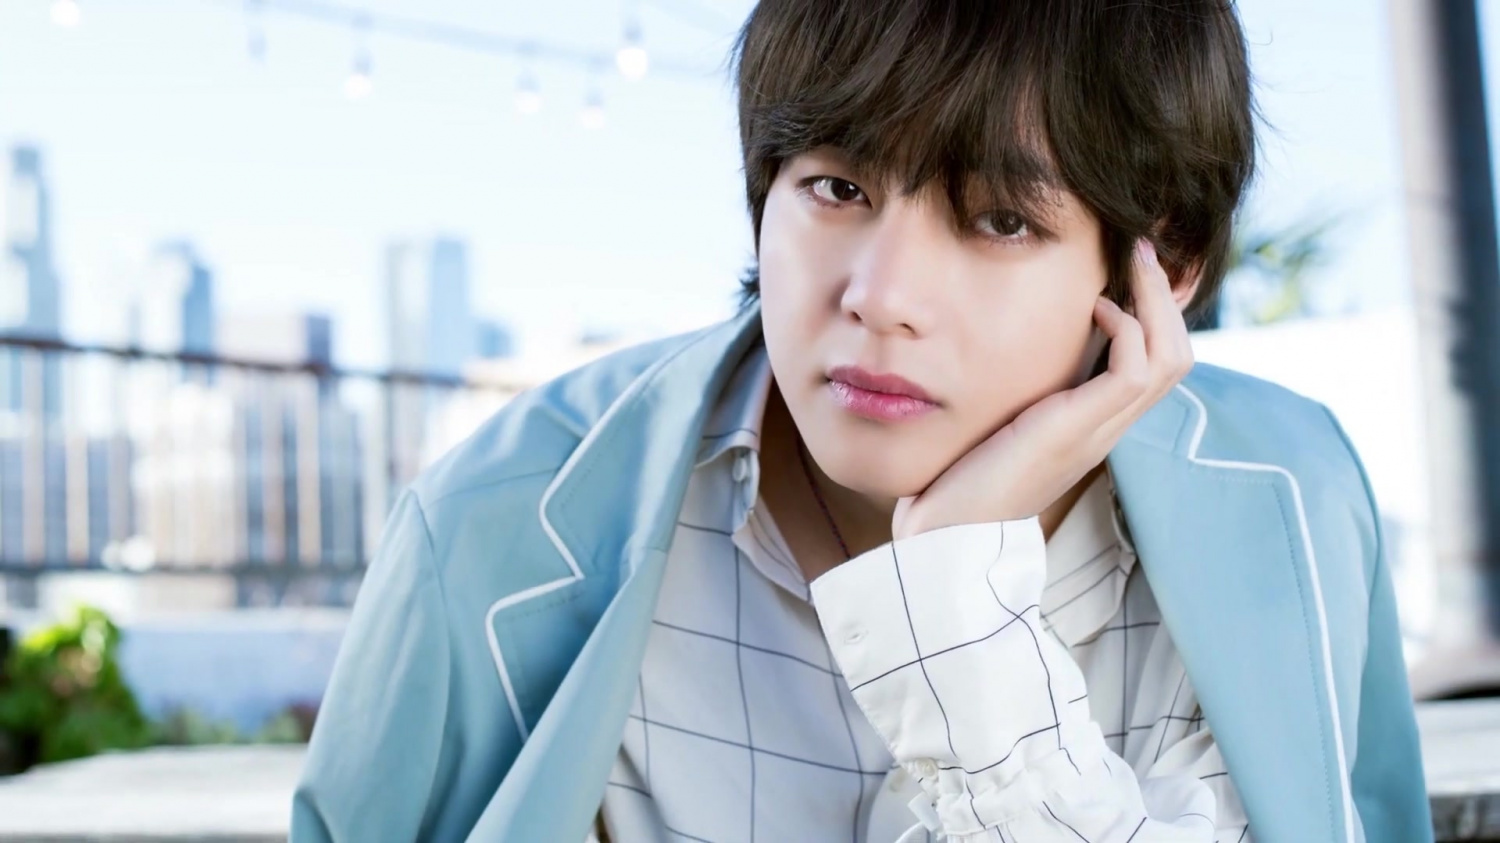 BTS 2021: Here’s How V Responded When RM Asked About His First Love